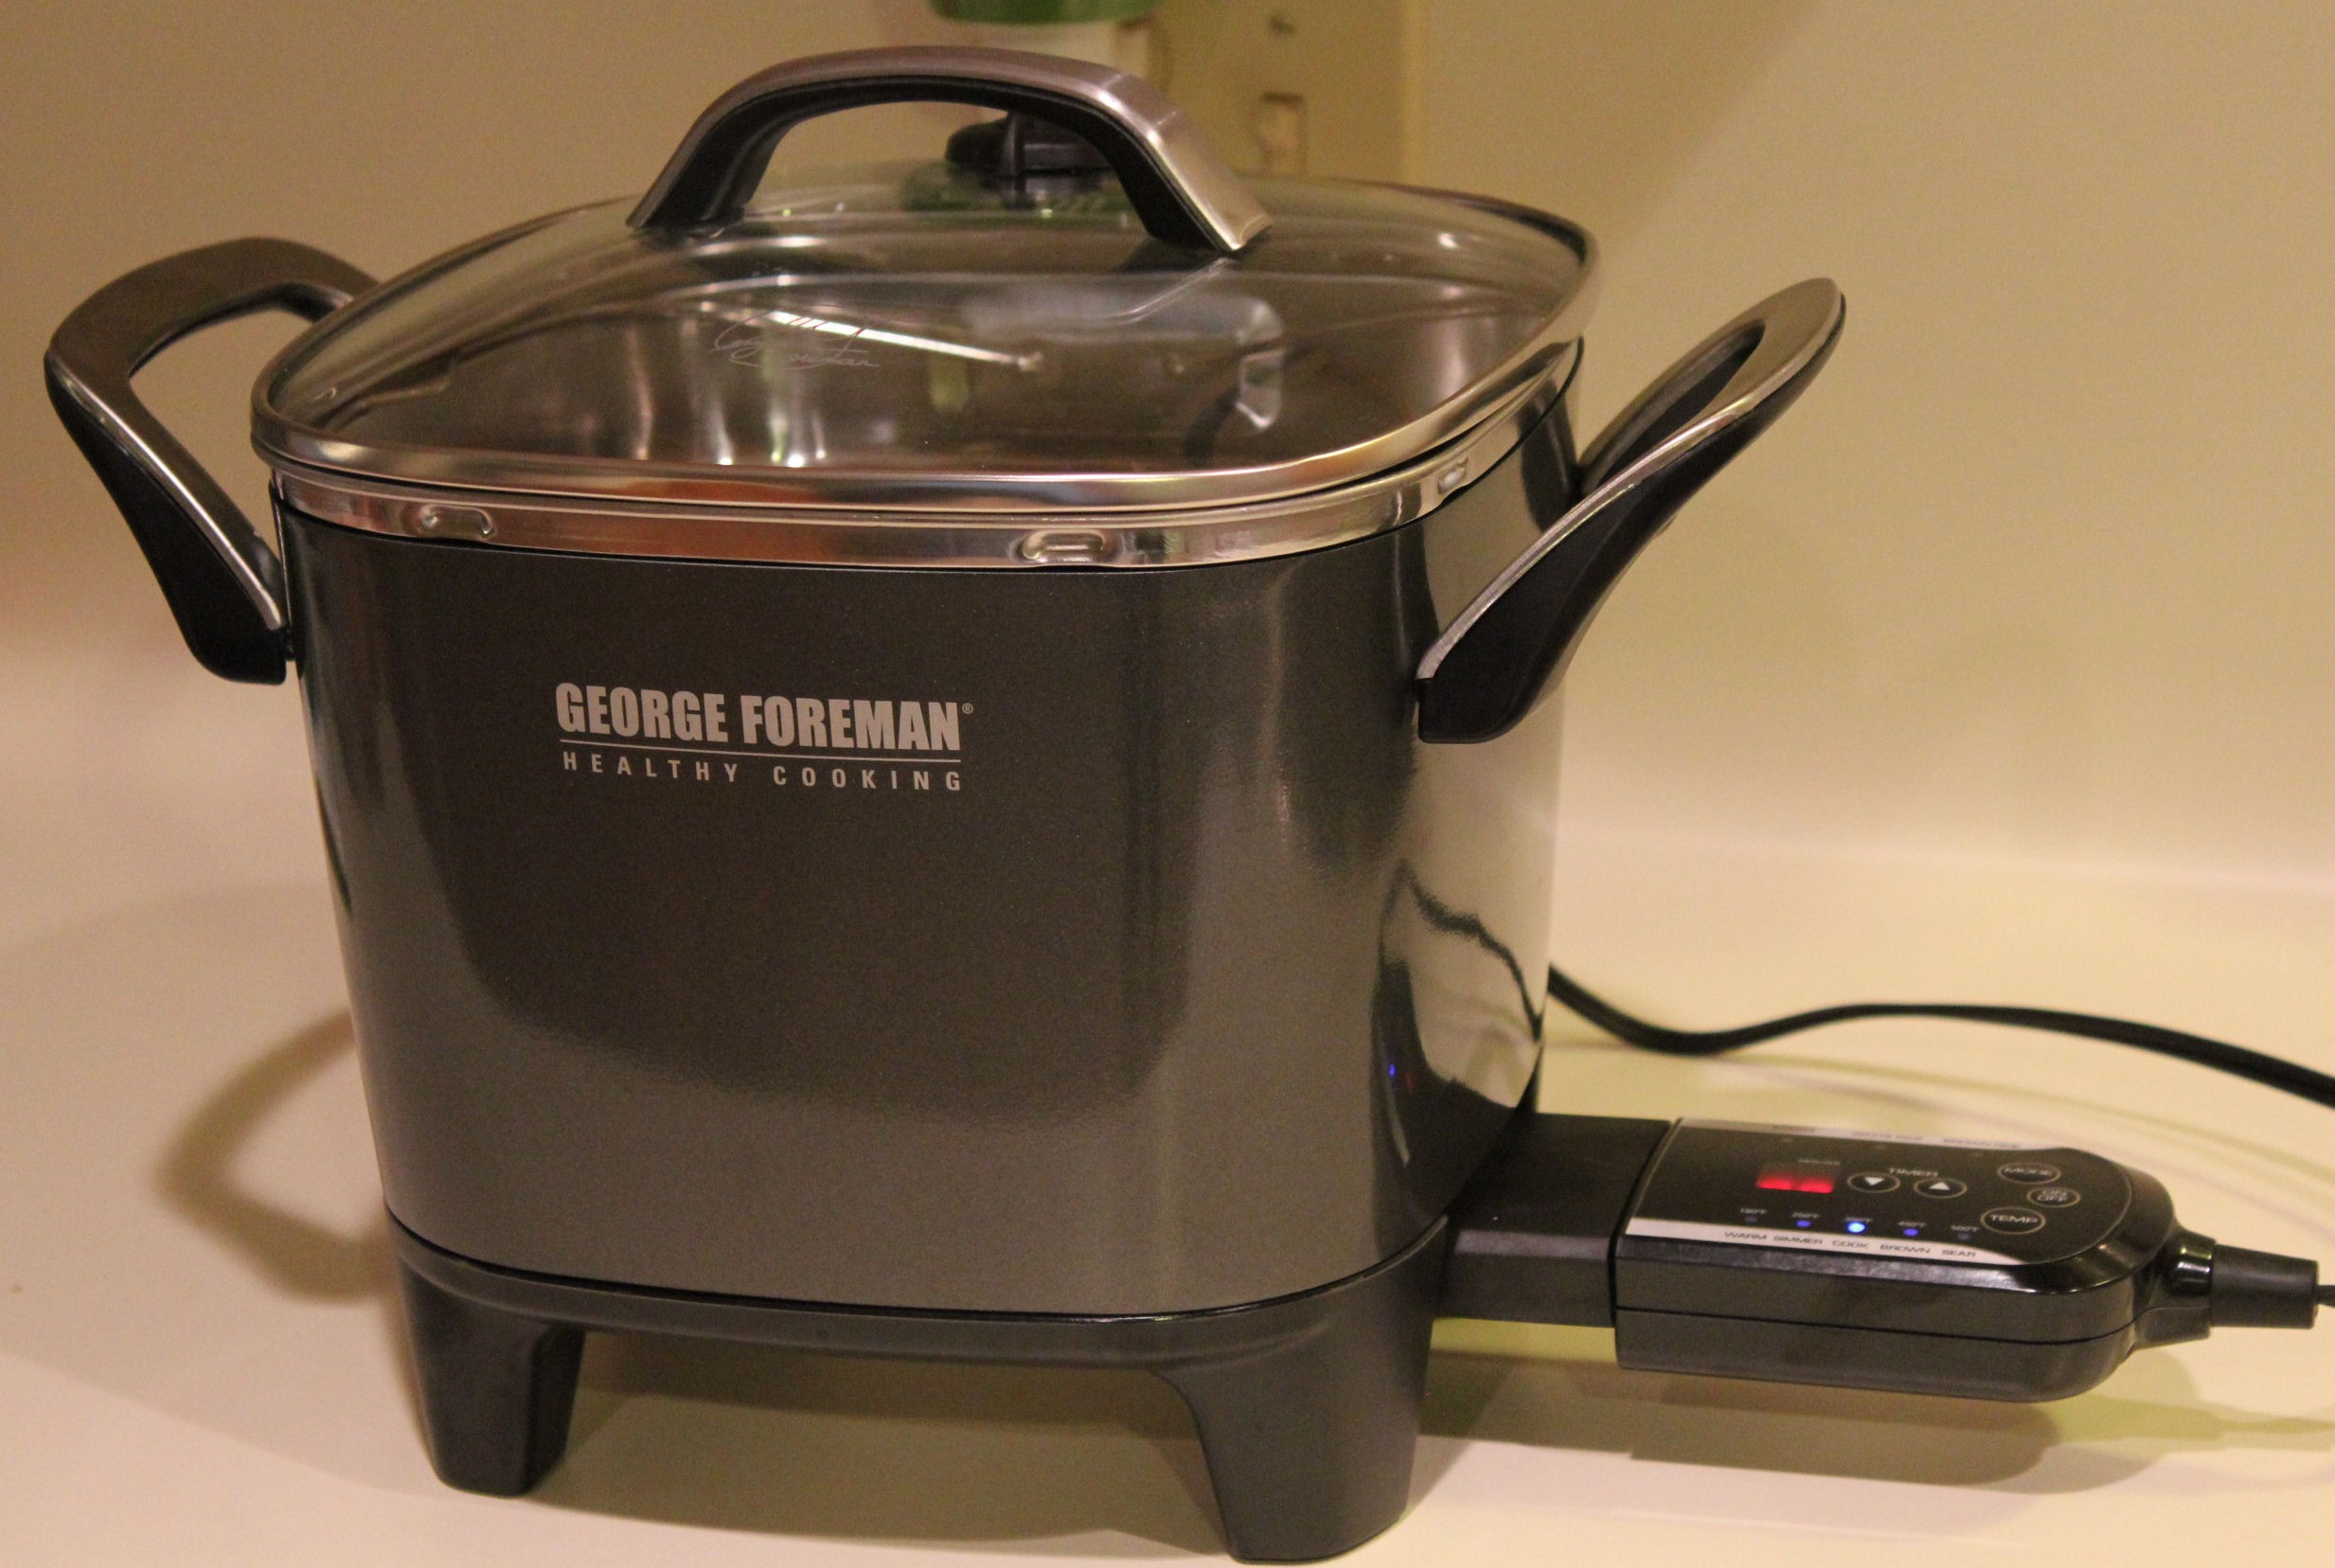 Healthy Living Made Simple with the George Foreman SuppMix